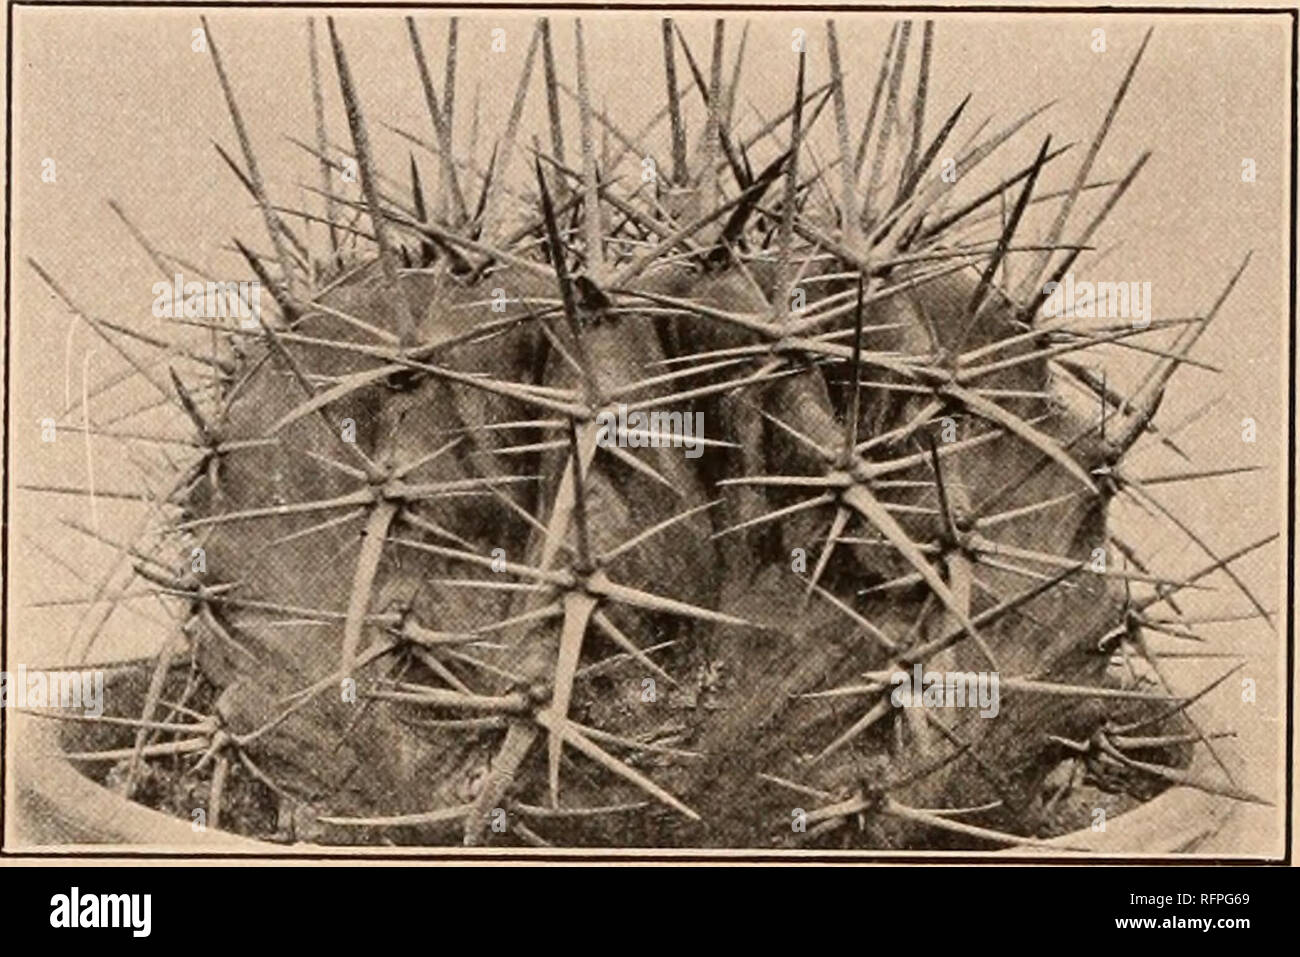 . Carnegie Institution of Washington publication. 172 THE CACTACEAE. Type locality: Mexico. Distribution: Eastern Mexico. Unfortunately, the type of the genus Echinocactus is now known only from the early descriptions and a single illustration. It seems to be quite distinct from the other species of the genus. The large giant cacti are very common in eastern Mexico, but it will require some very careful field work to disentangle the species. Illustration: Link and Otto, Verh. Ver. Beford. Gartenb. 3: pi. 14, as Melocactus plat y acanthus.. Fig. it -Echinocactus palmeri. 6. Echinocactus palmeri Stock Photo